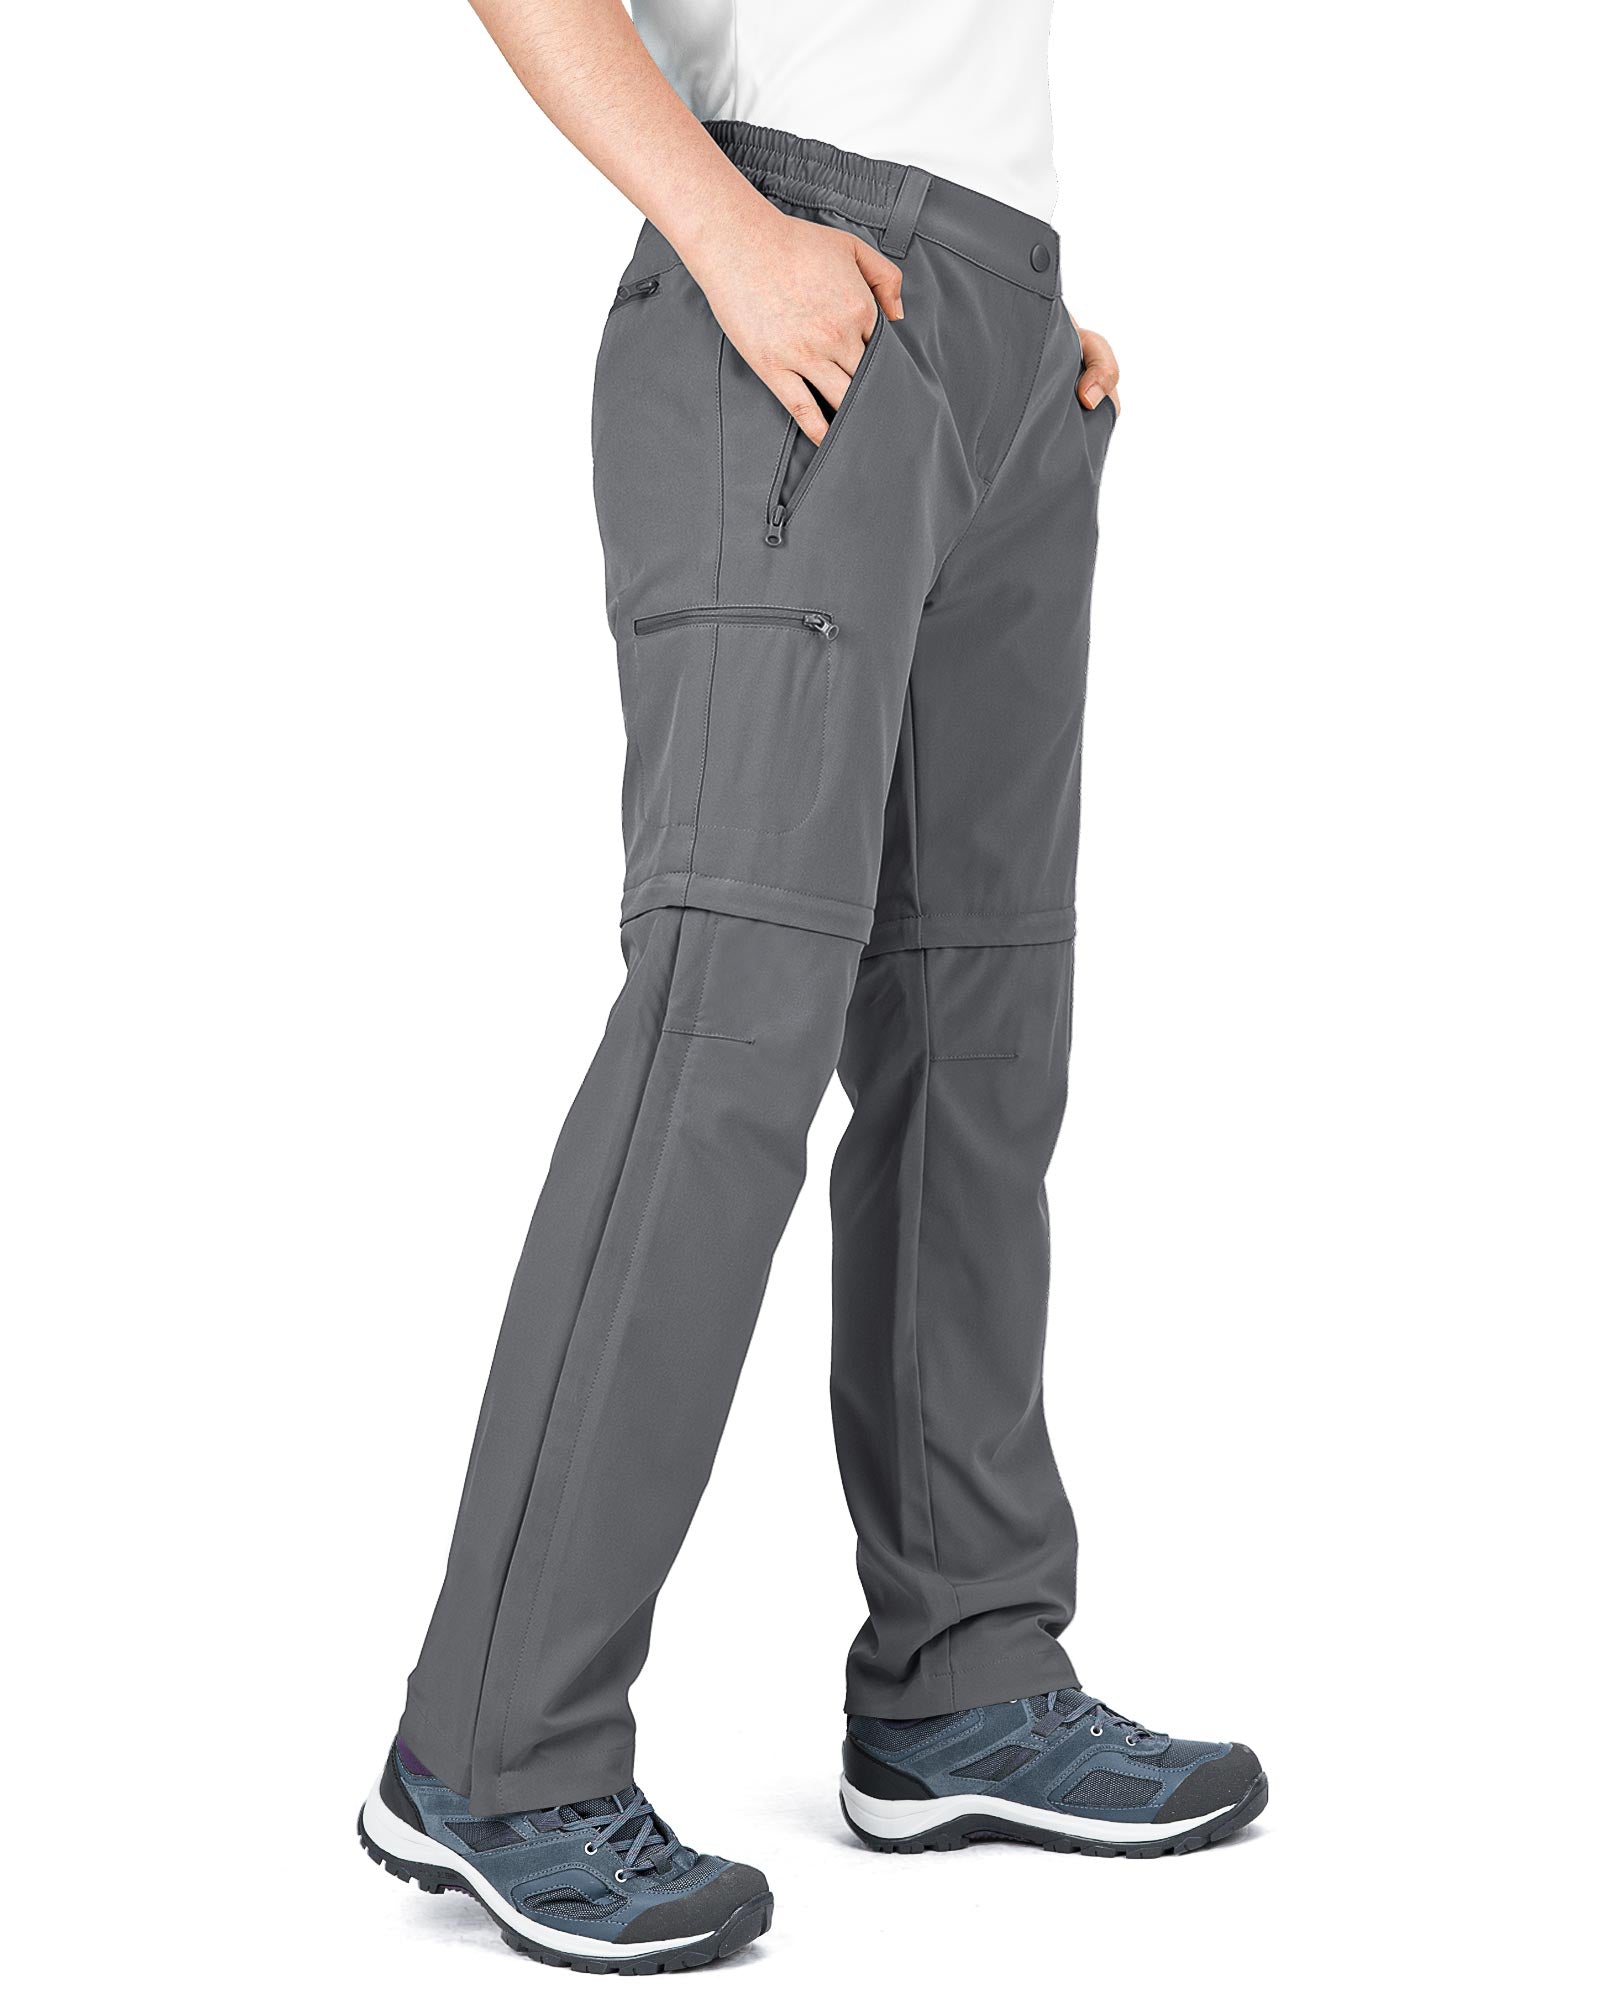 Women's Convertible Zip-Off Hiking Pants with 4 Pockets – 33,000ft